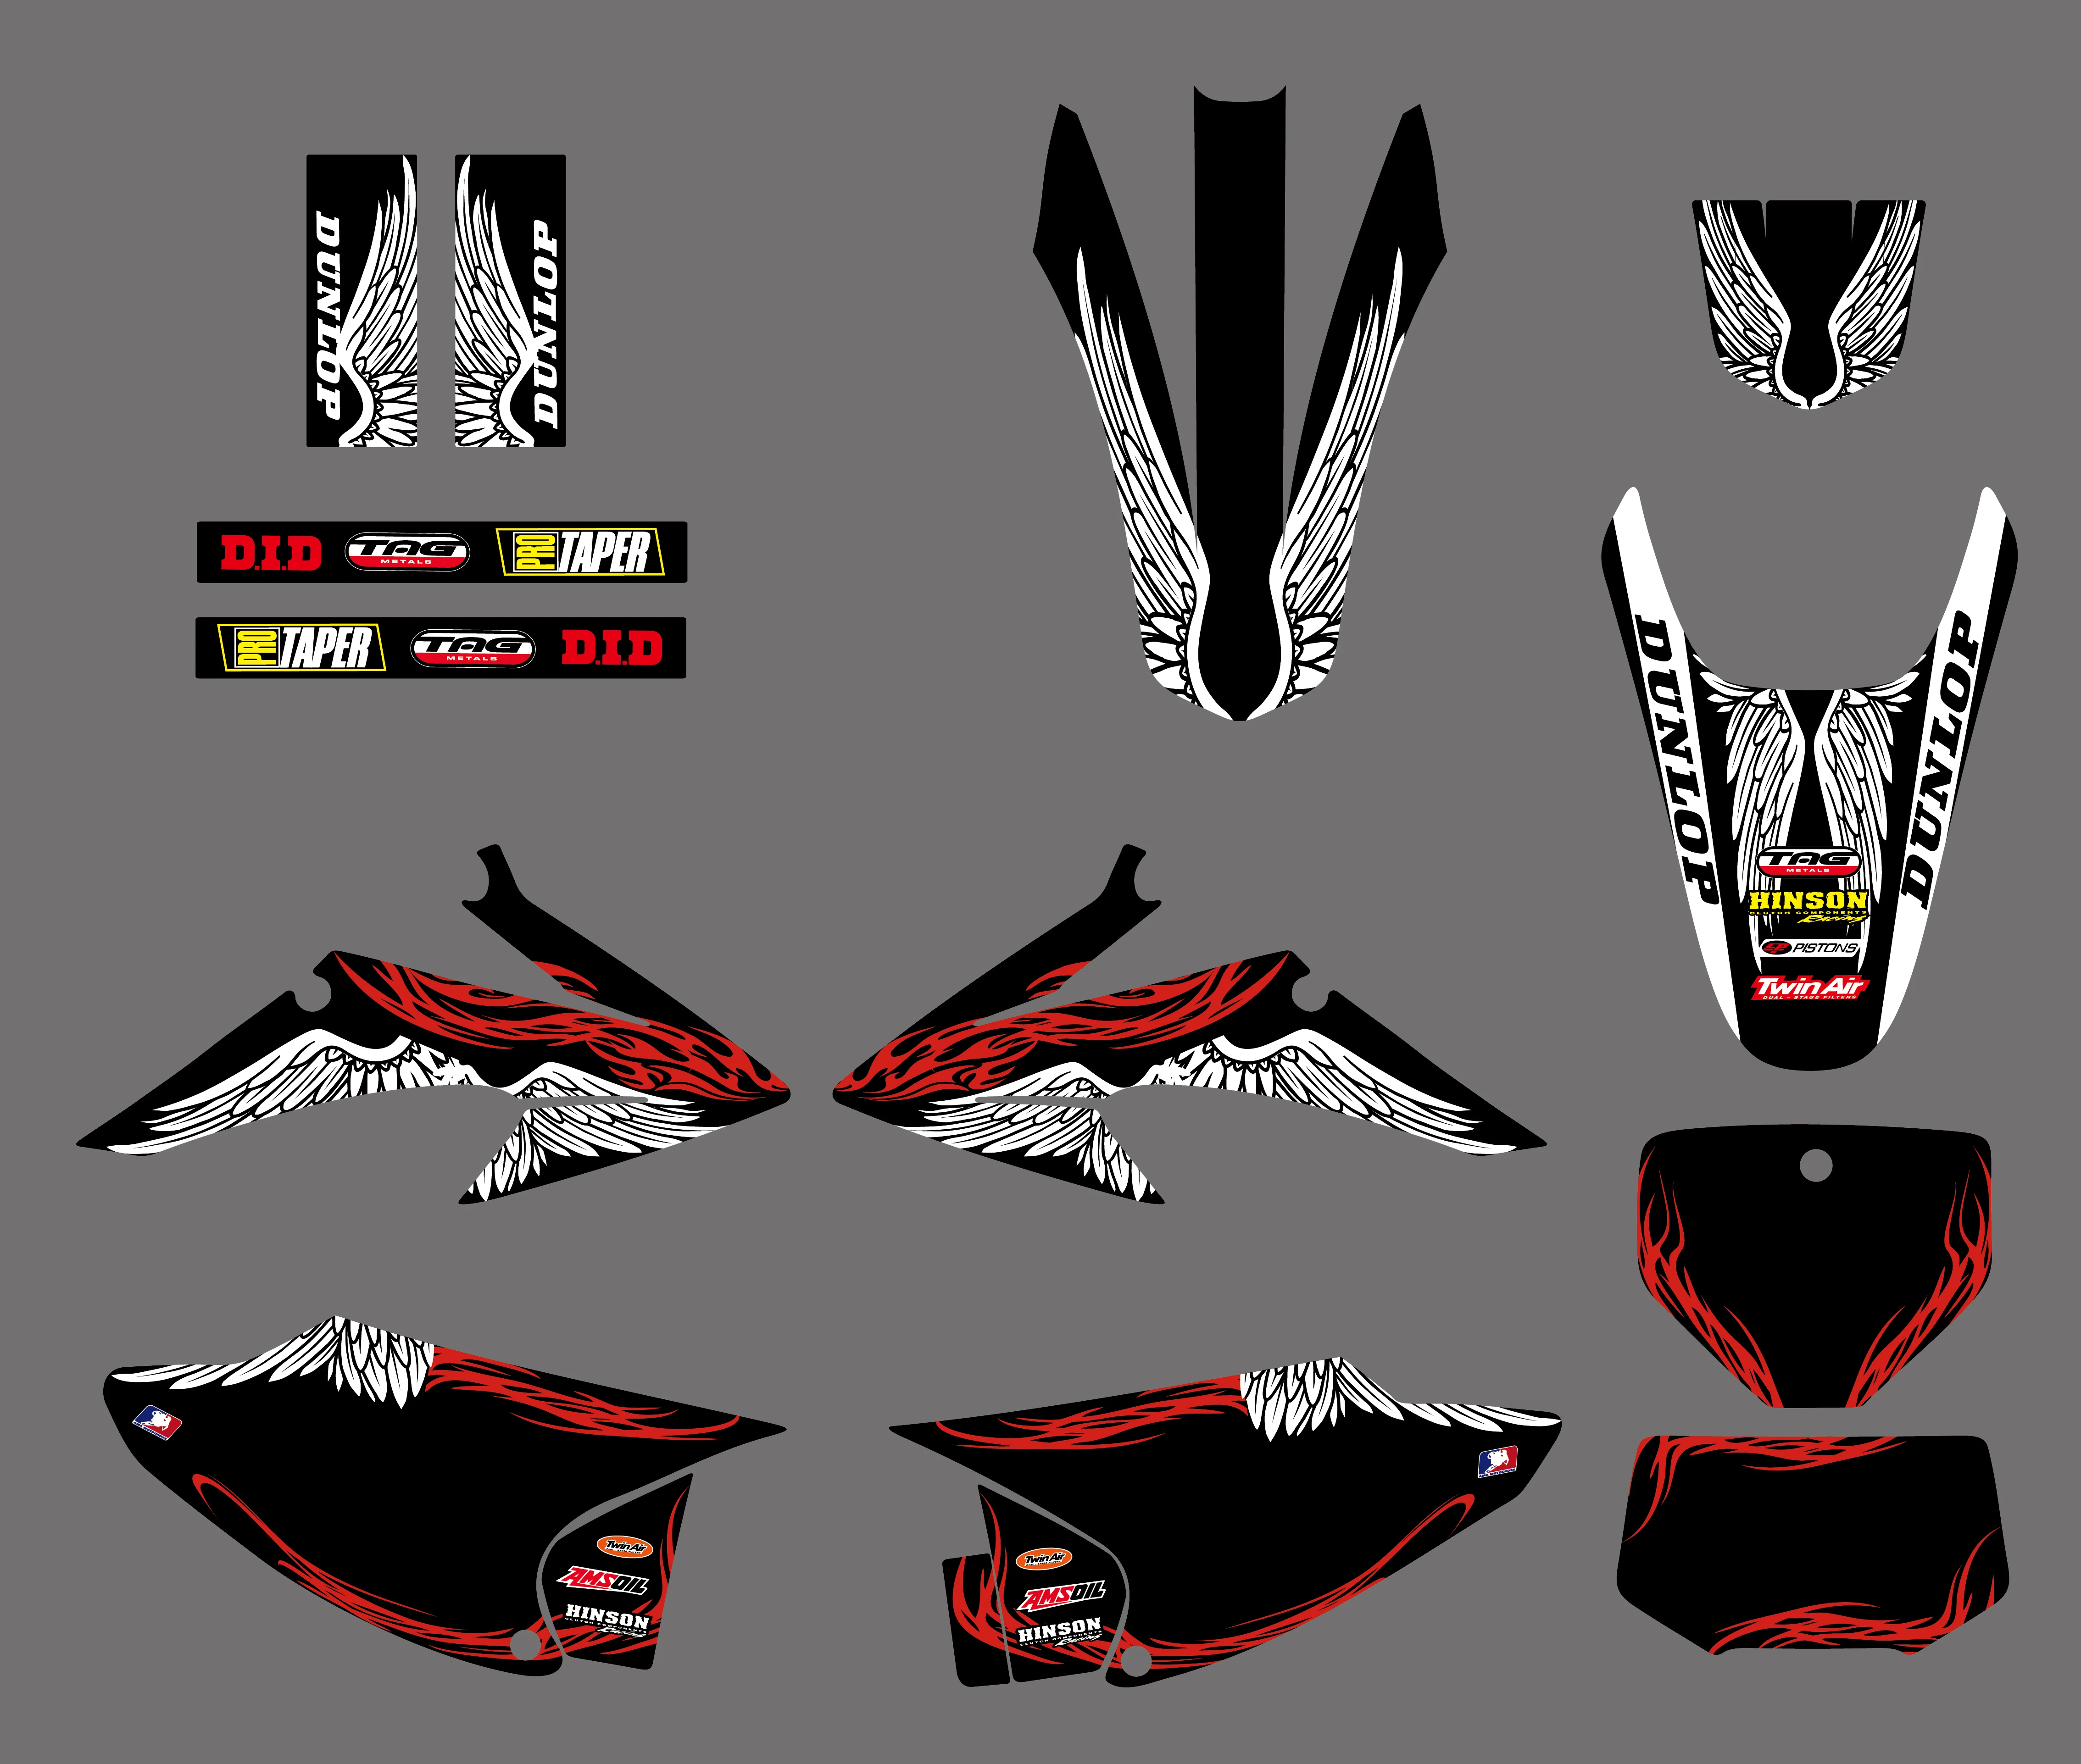 

New Style TEAM GRAPHICS BACKGROUNDS FOR Honda CRF150 CRF230 CRF150F CRF230F 2008 2009 2010 2011 2012 2013 2014